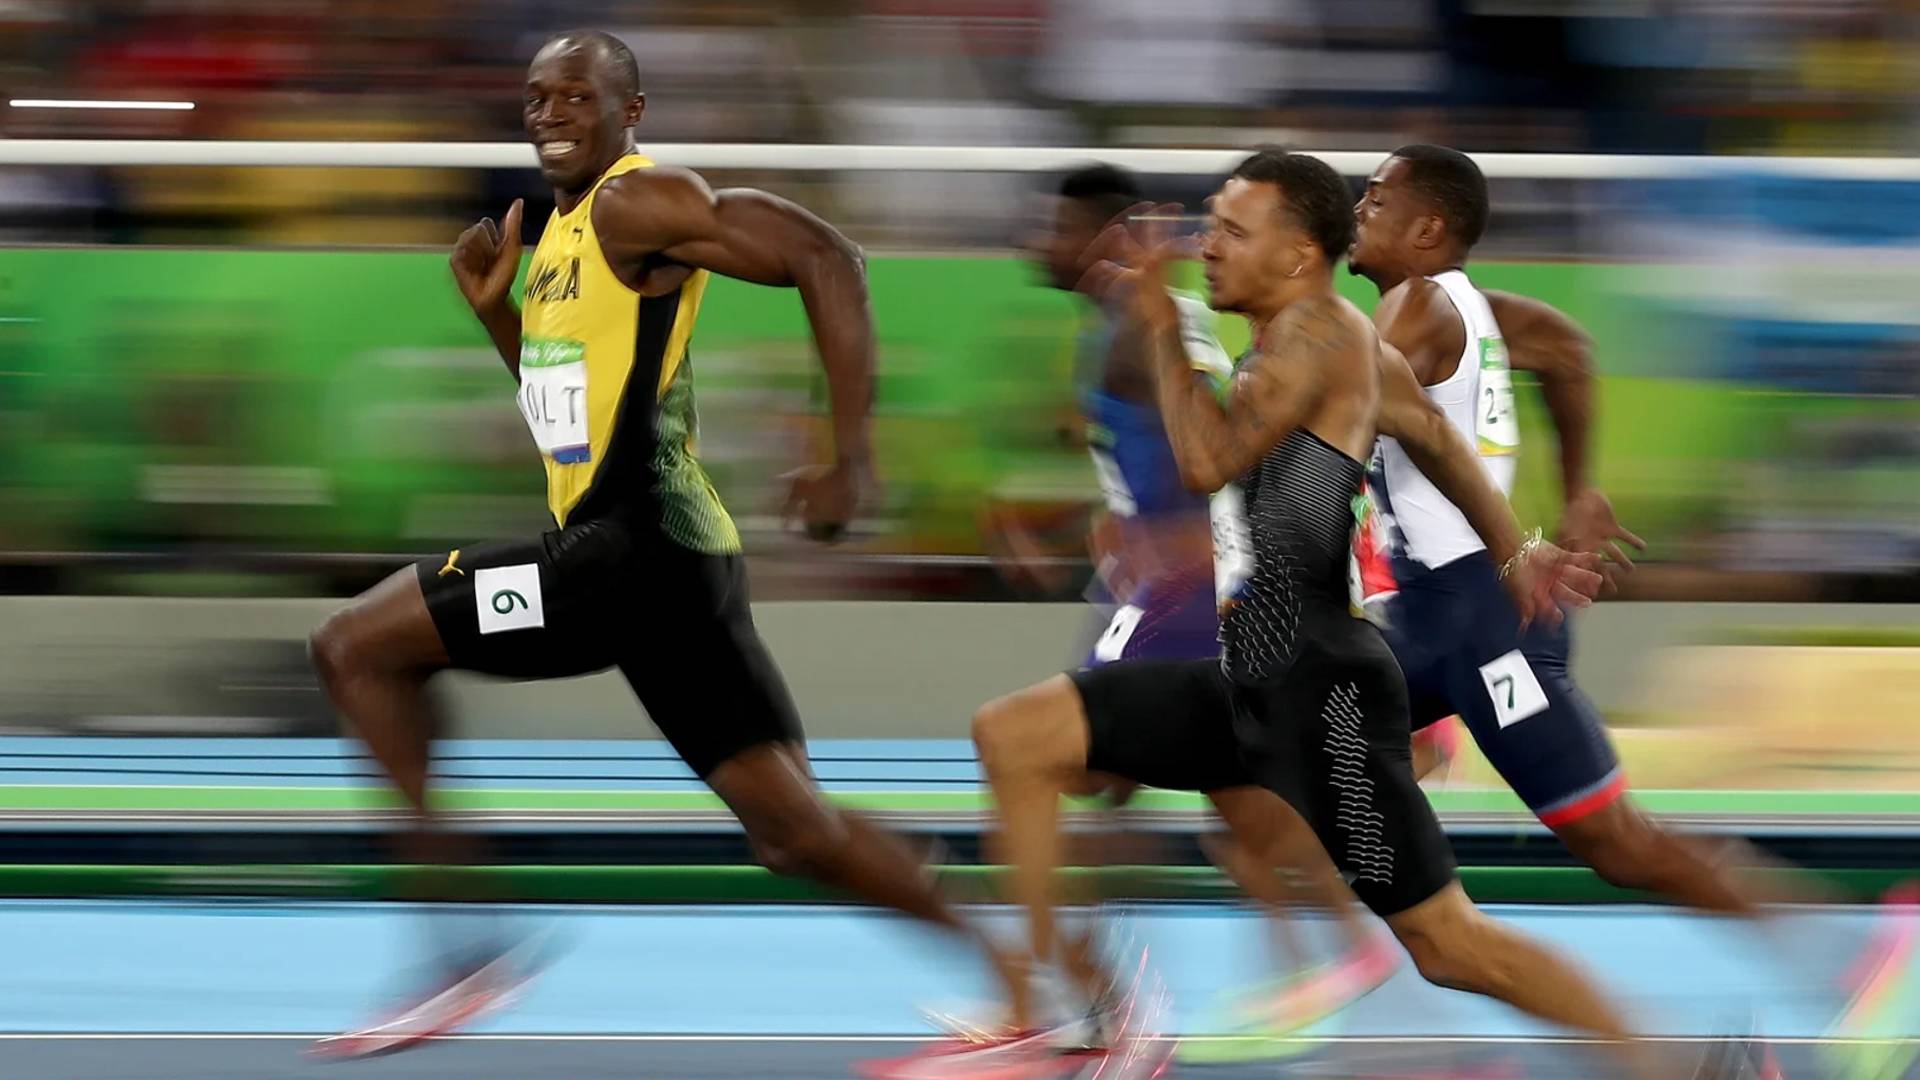 Usain Bolt in action during the men's 100 meter semifinal of the Rio Olympics 2016